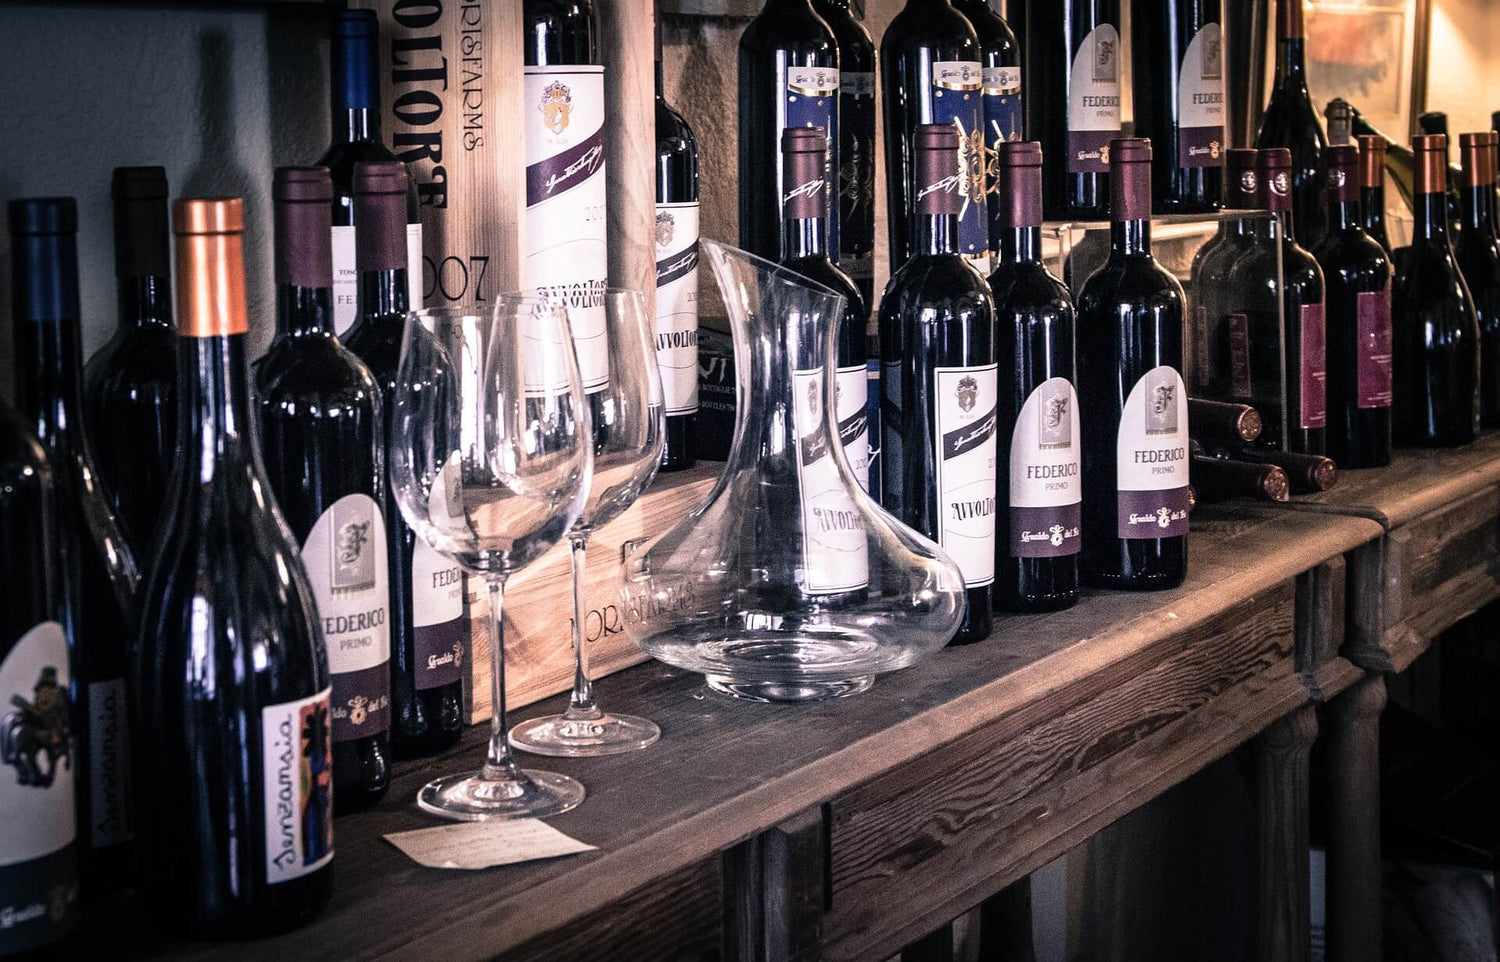 Which Wine Region Makes the Best of Your Favorite Varietal?